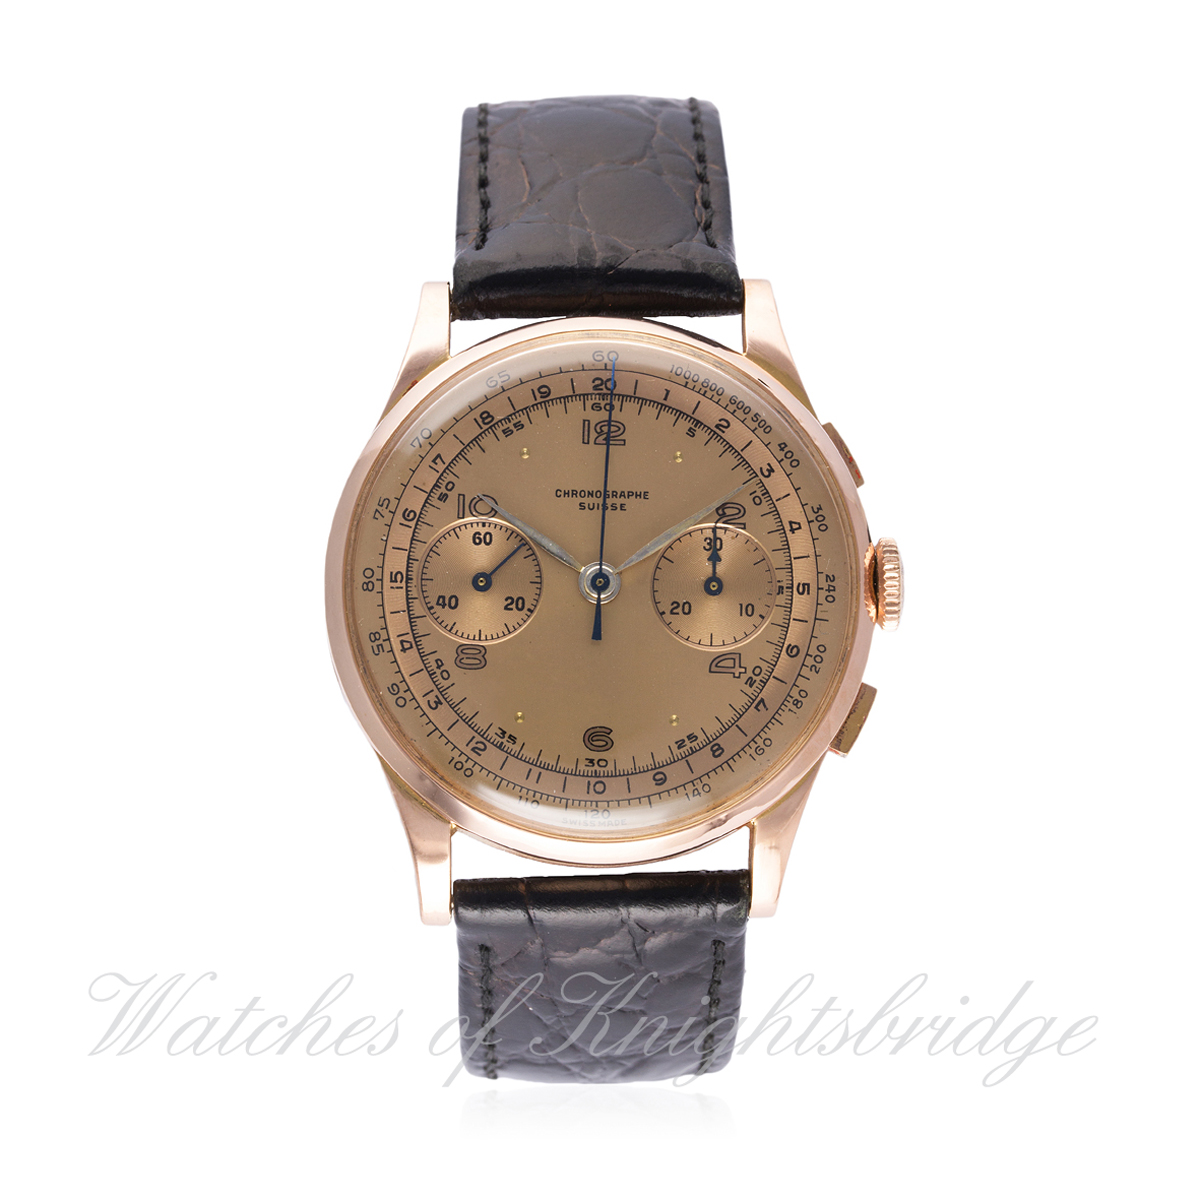 A GENTLEMAN'S 18K SOLID ROSE GOLD CHRONOGRAPHE SUISSE CHRONOGRAPH WRIST WATCH CIRCA 1940s D: Two